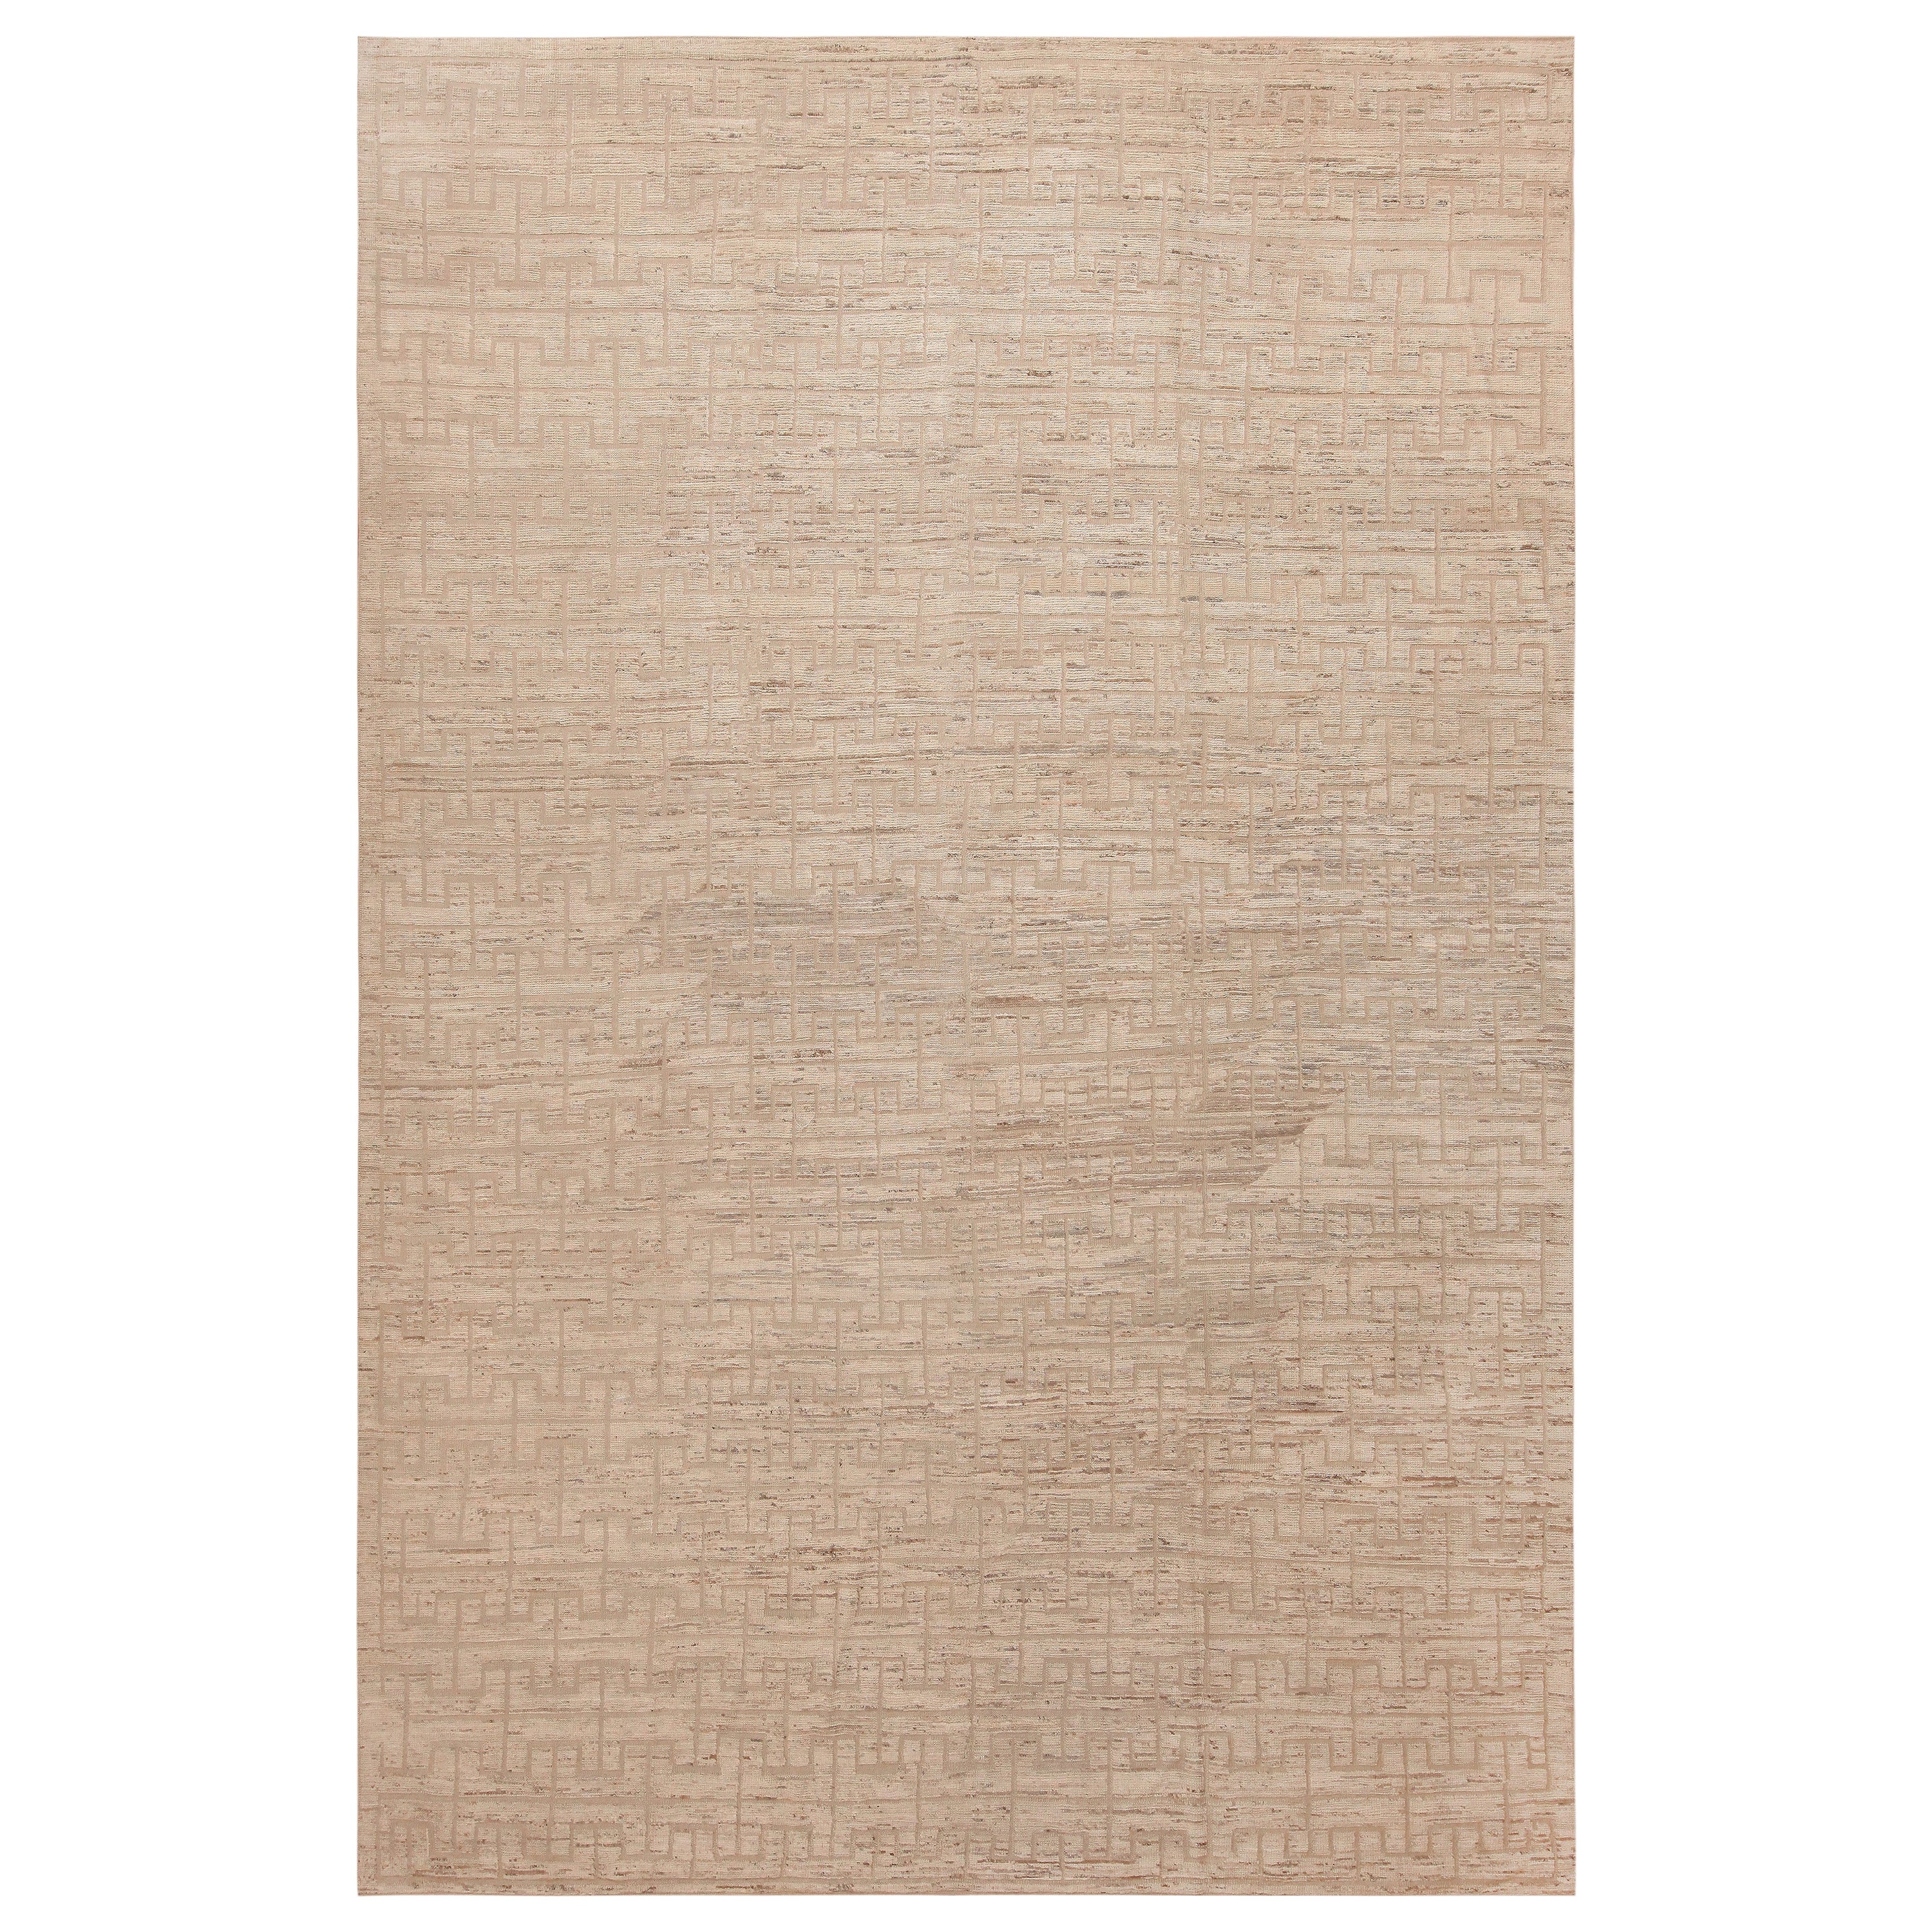 Nazmiyal Collection Geometric Textured Modern Rug. 9 ft 7 in x 14 ft 7 in 